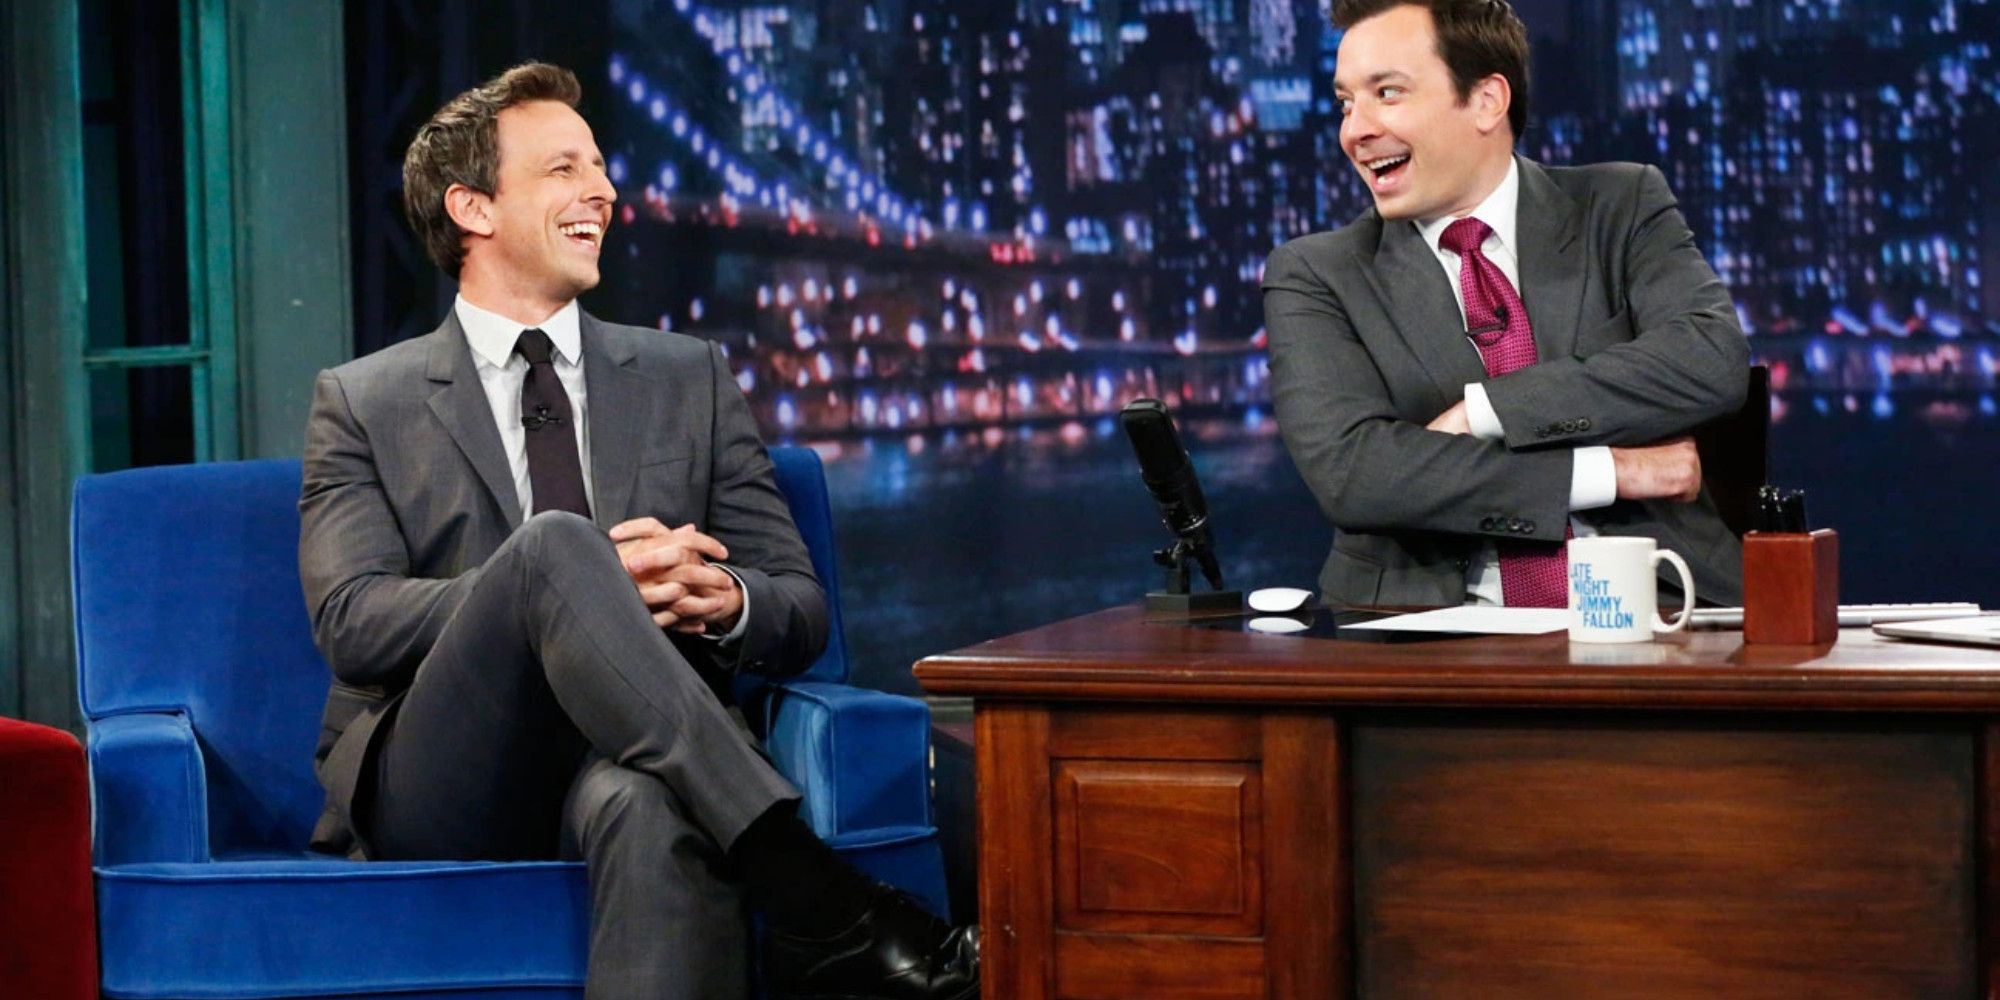 Seth Meyers and Jimmy Fallon share a laugh on The Tonight Show Starring Jimmy Fallon